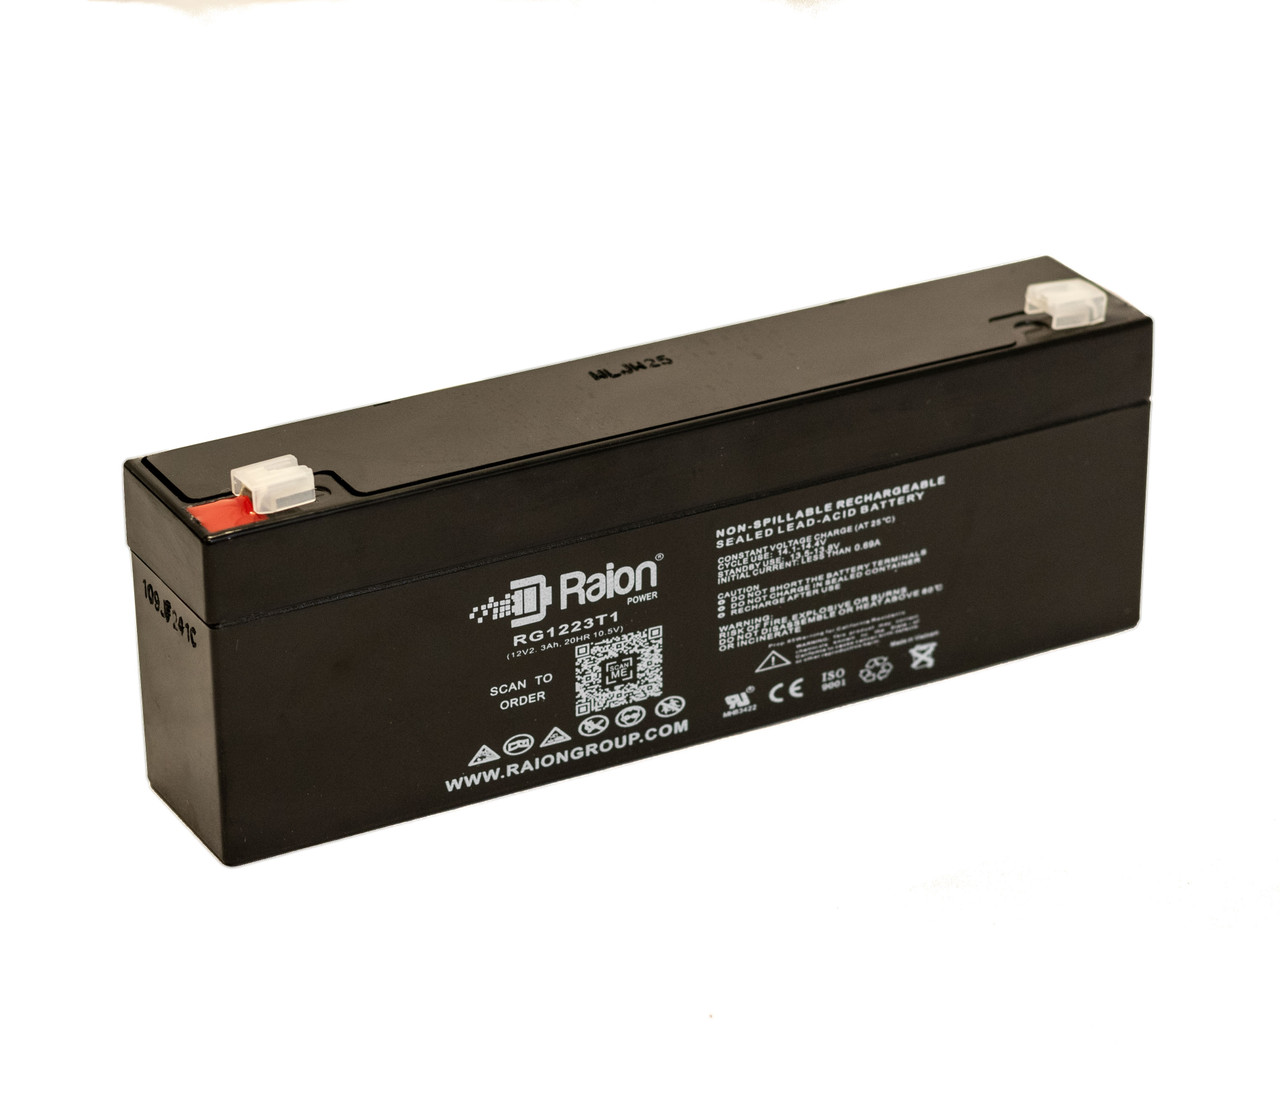 Raion Power RG1223T1 Replacement Battery for Armstrong AA750 Patient Stimulator